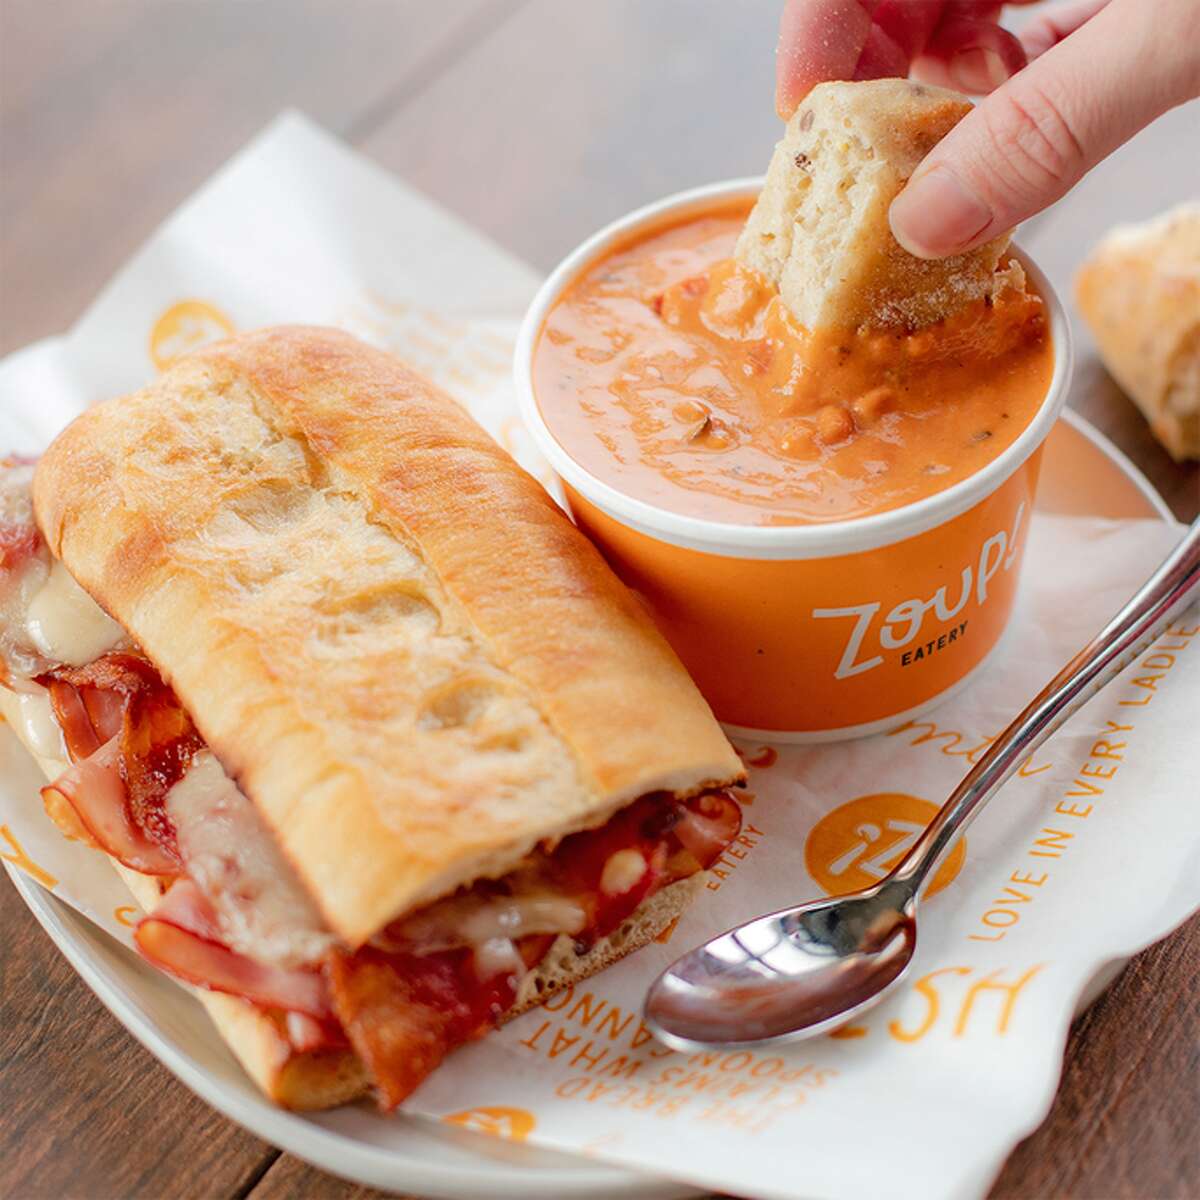 Zoup! Eatery, along with its new model, is slated to come to Detroit, Ann Arbor, Lansing and Grand Rapids.